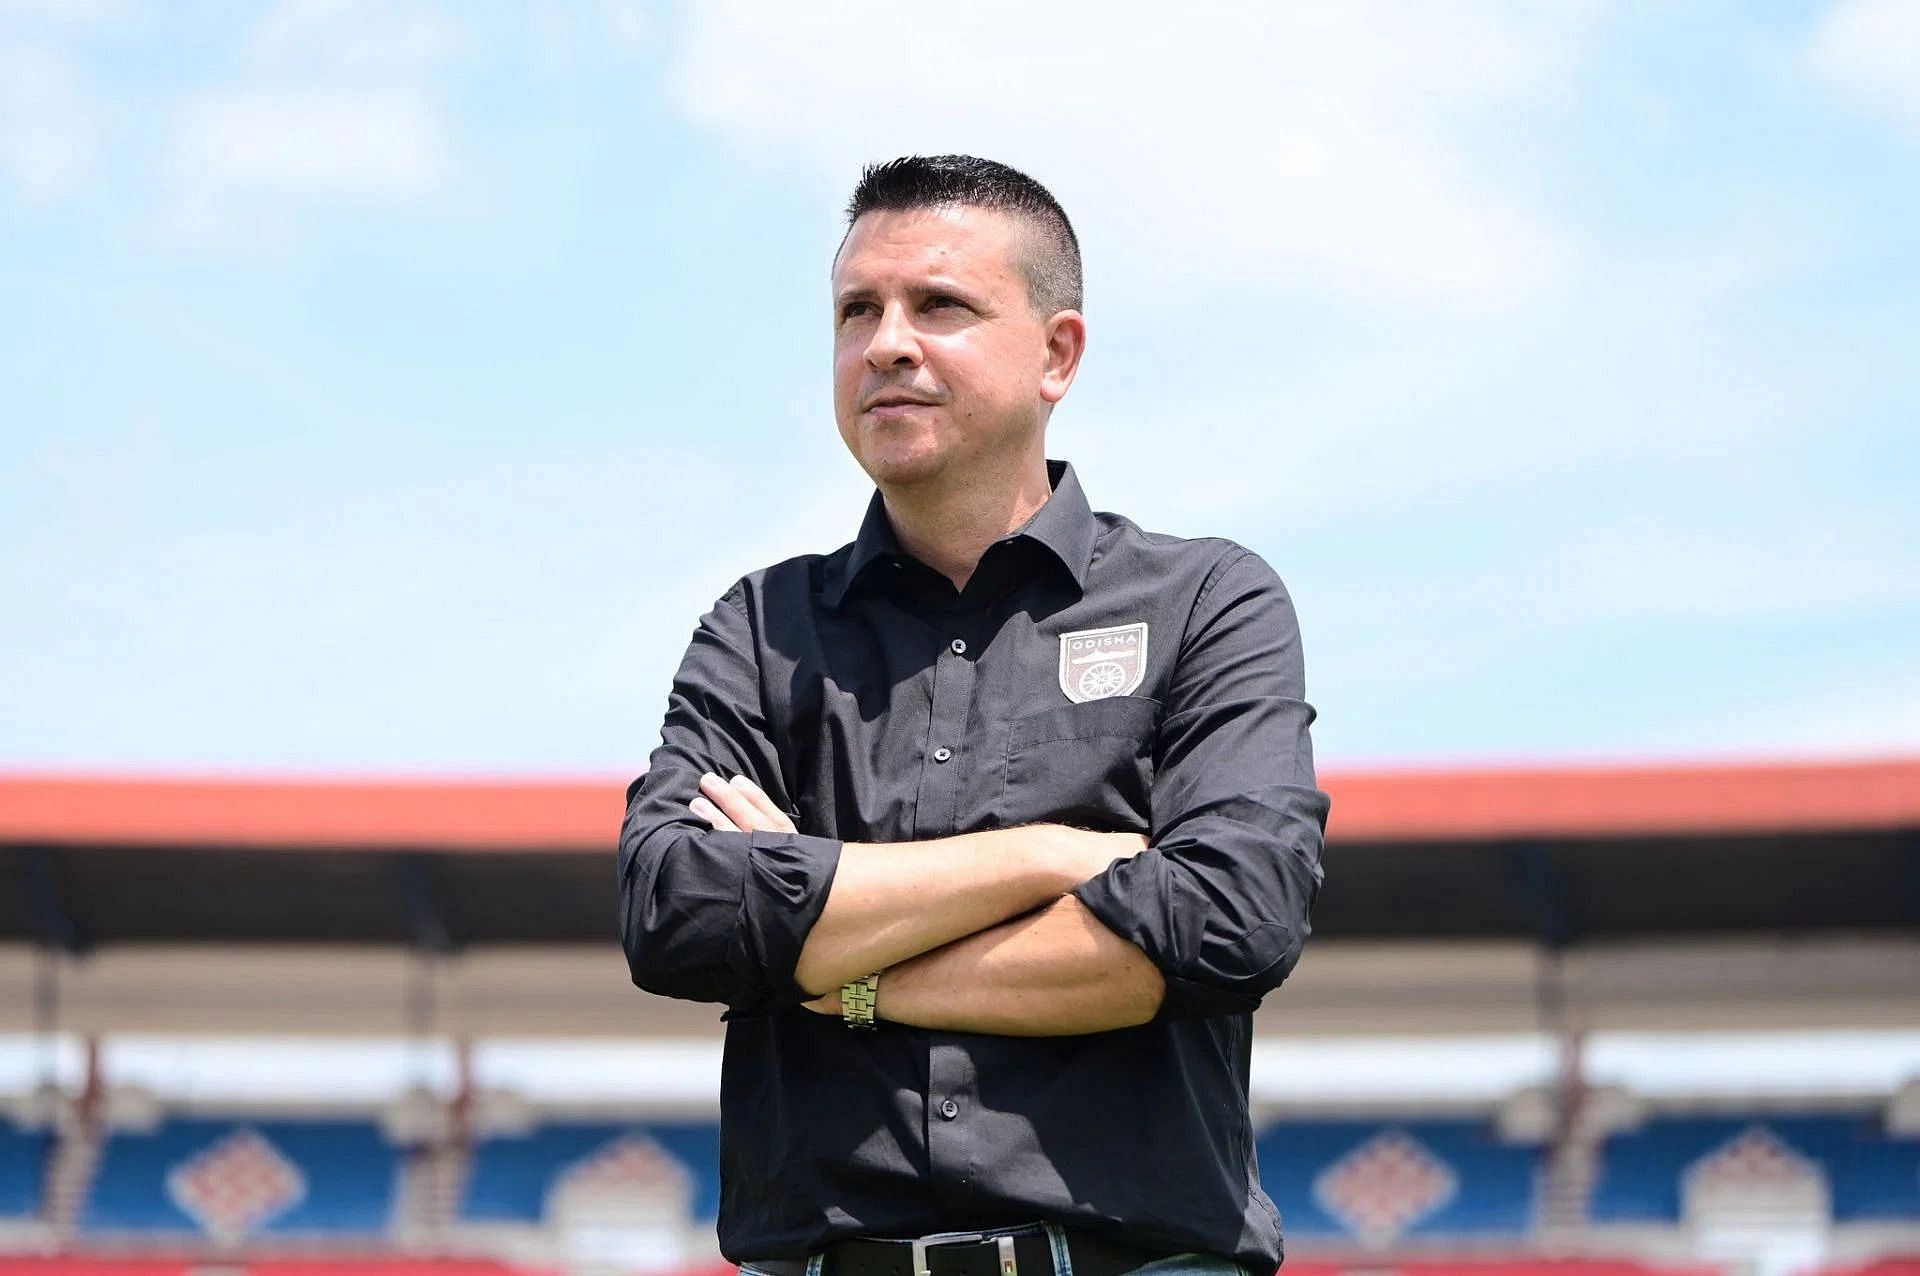 Odisha FC head coach Sergio Lobera is excited about the prospect of facing the League Shield Winners Mohun Bagan Super Giant at the Salt Lake stadium on Sunday, April 28